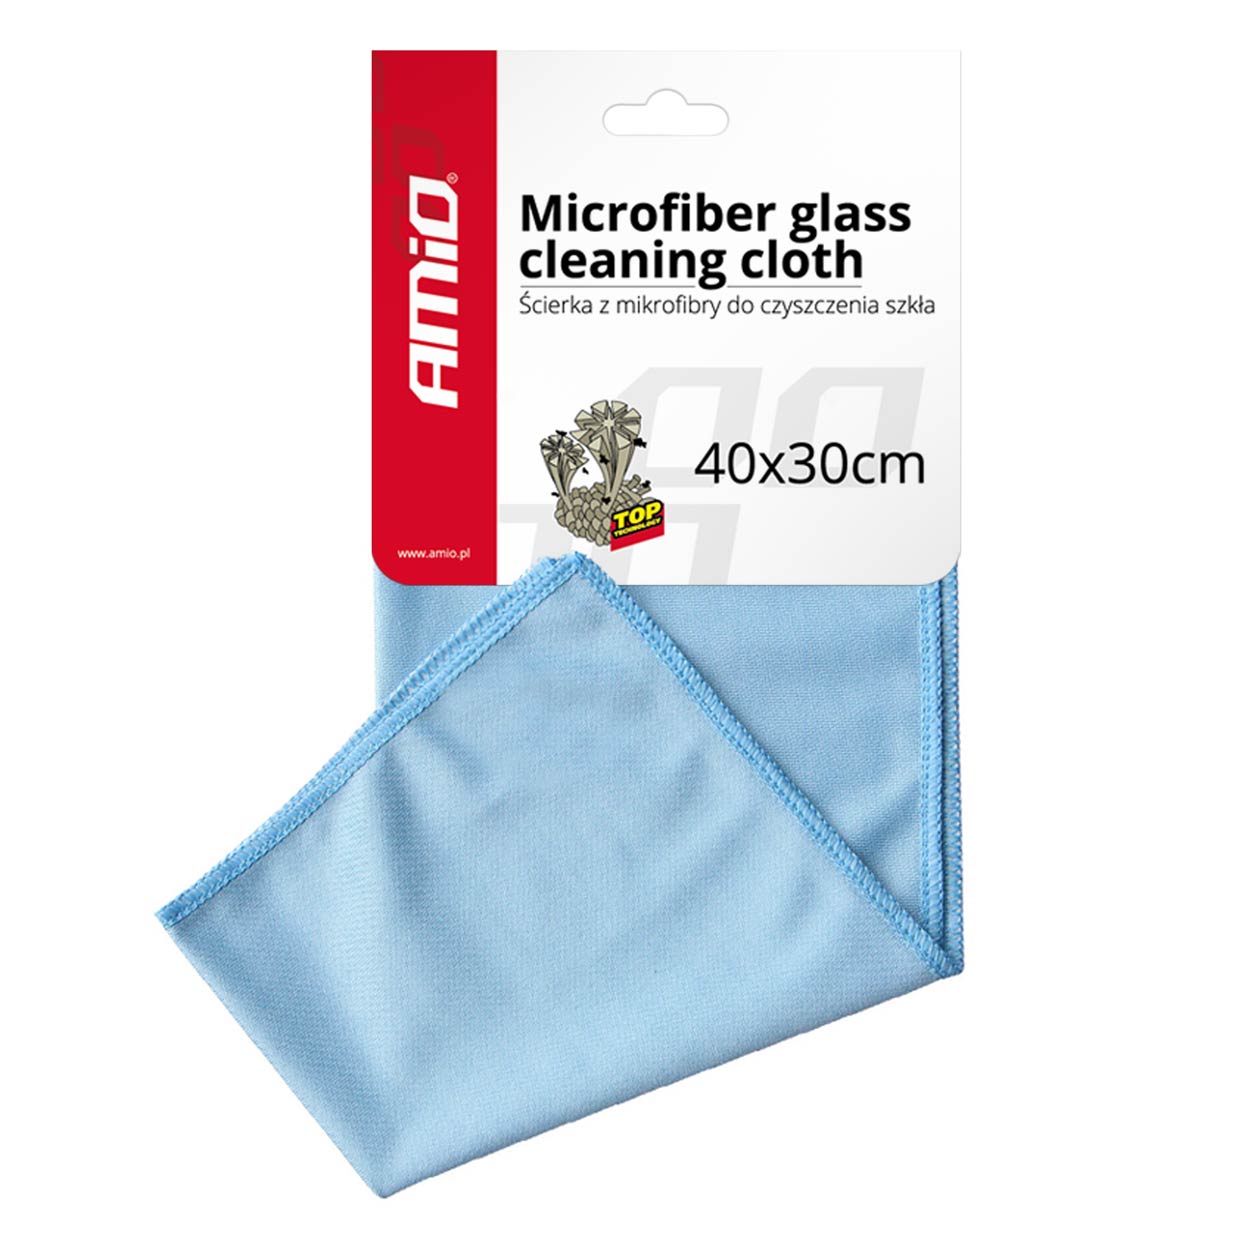 Microfibre Cleaning Cloth for Glass - spo-cs-disabled - spo-default - spo-disabled - spo-notify-me-disabled